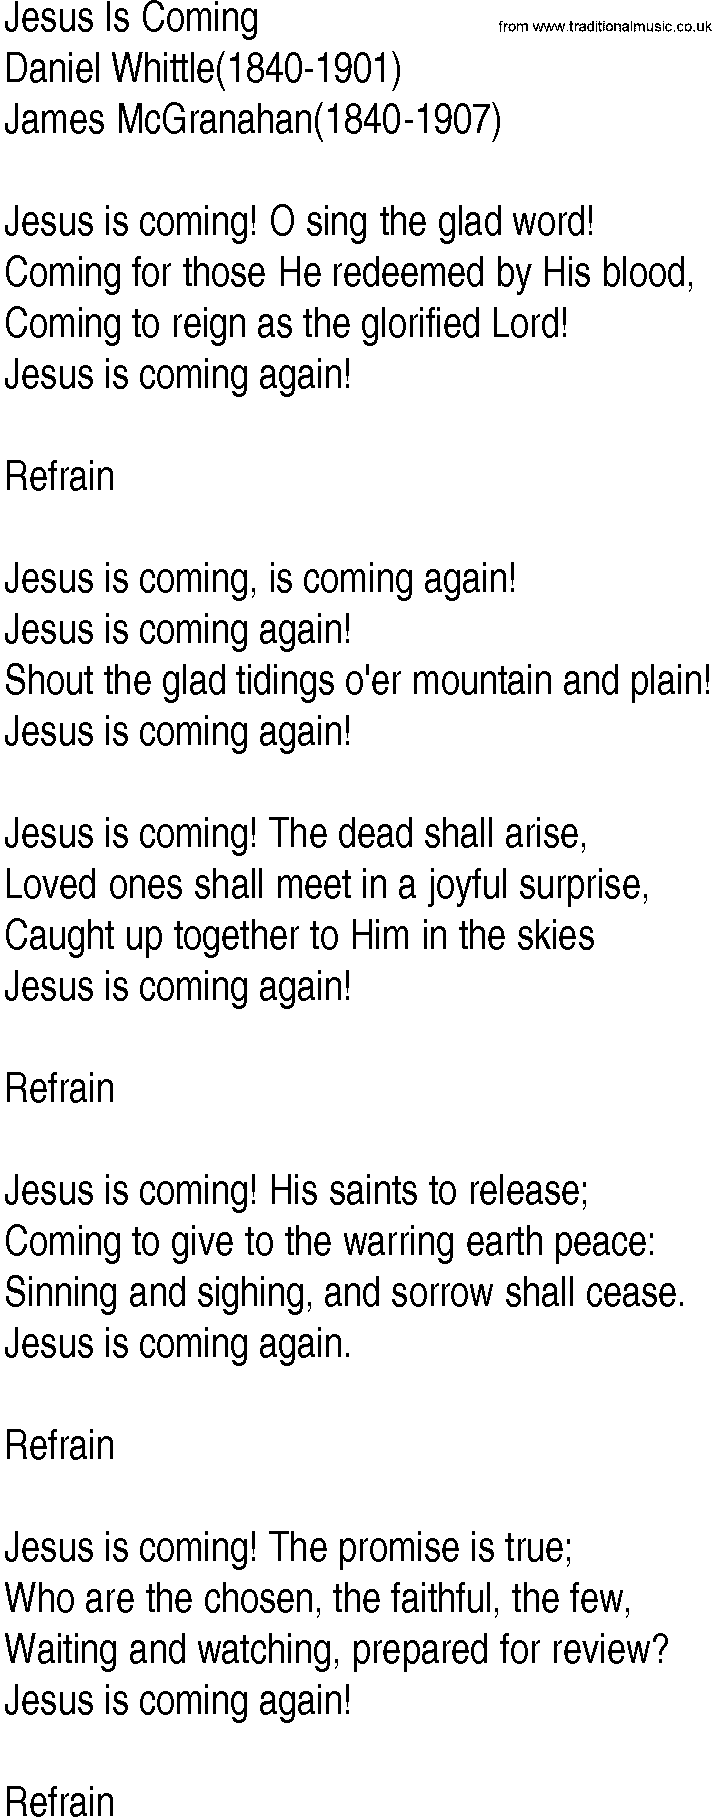 Hymn and Gospel Song: Jesus Is Coming by Daniel Whittle lyrics